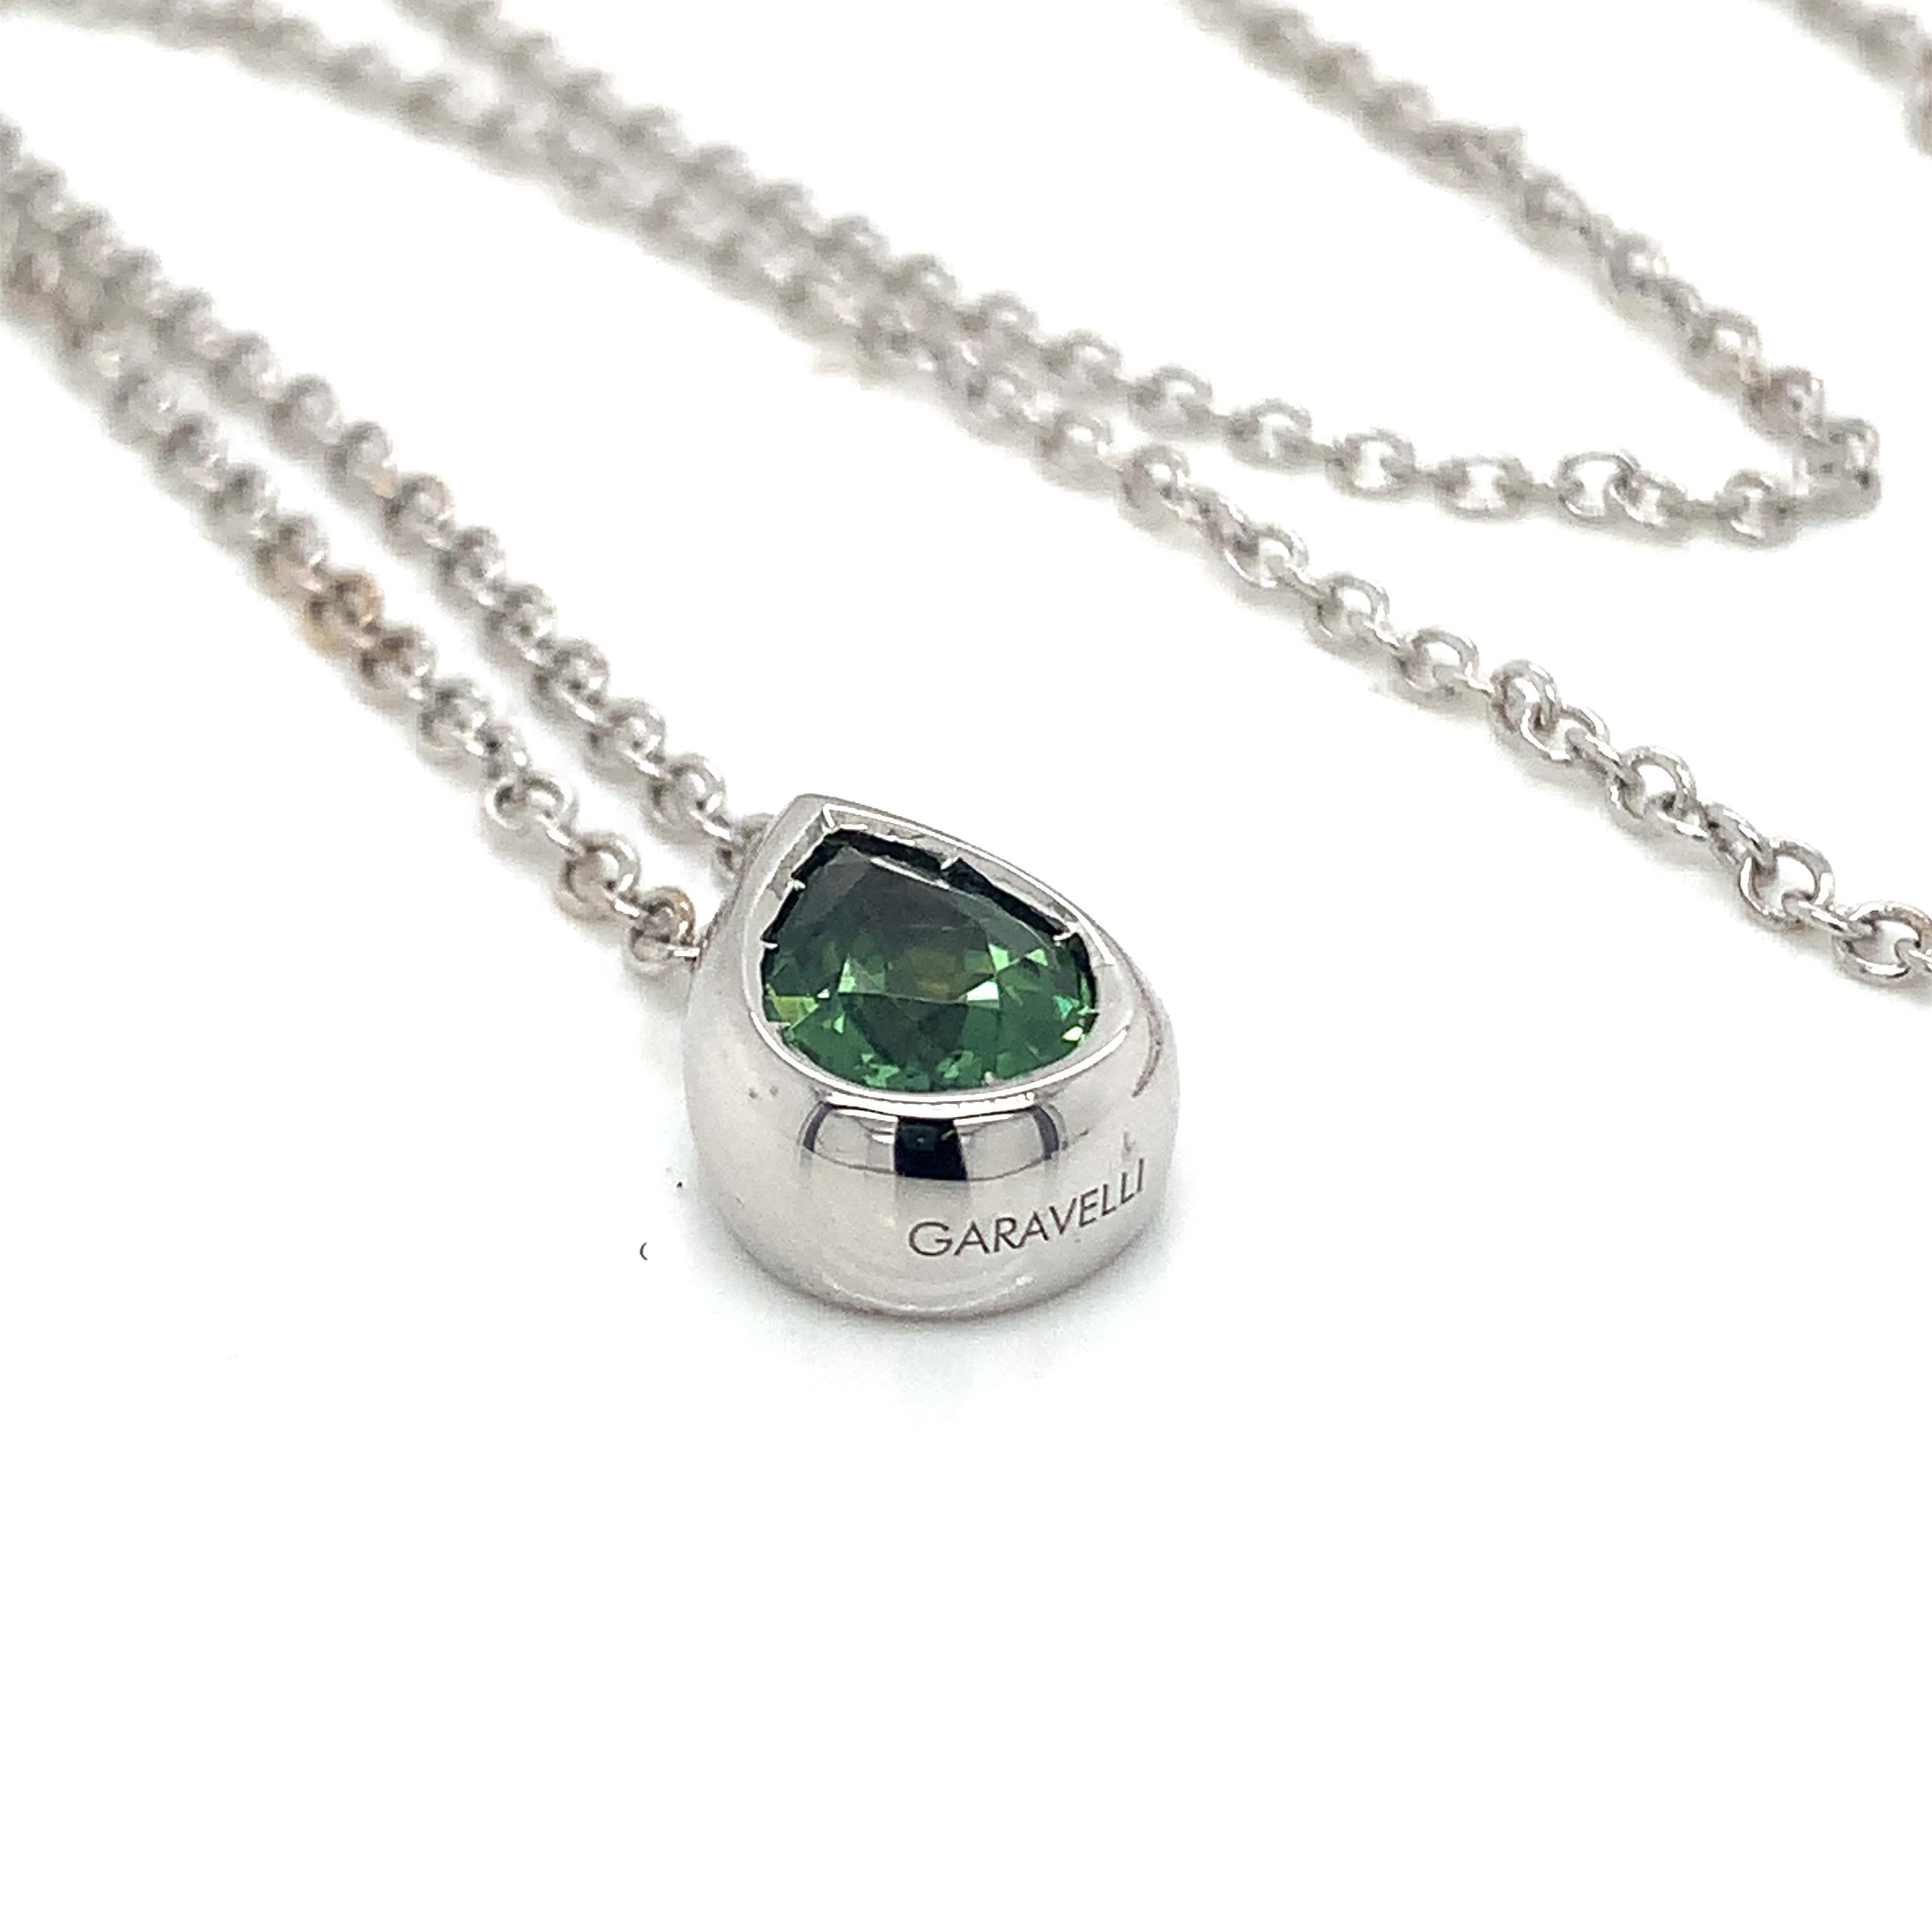 Garavelli DROP Pendant in 18kt White Gold with Green Tourmaline from the new Giotto Collection DROP pendant .
18kt gold Necklace included , lenght 19 inches with a loop at 17
18kt gold grs 6.90
Green Tourmaline mm  9 x mm 6  carats 1.20
Tourmaline